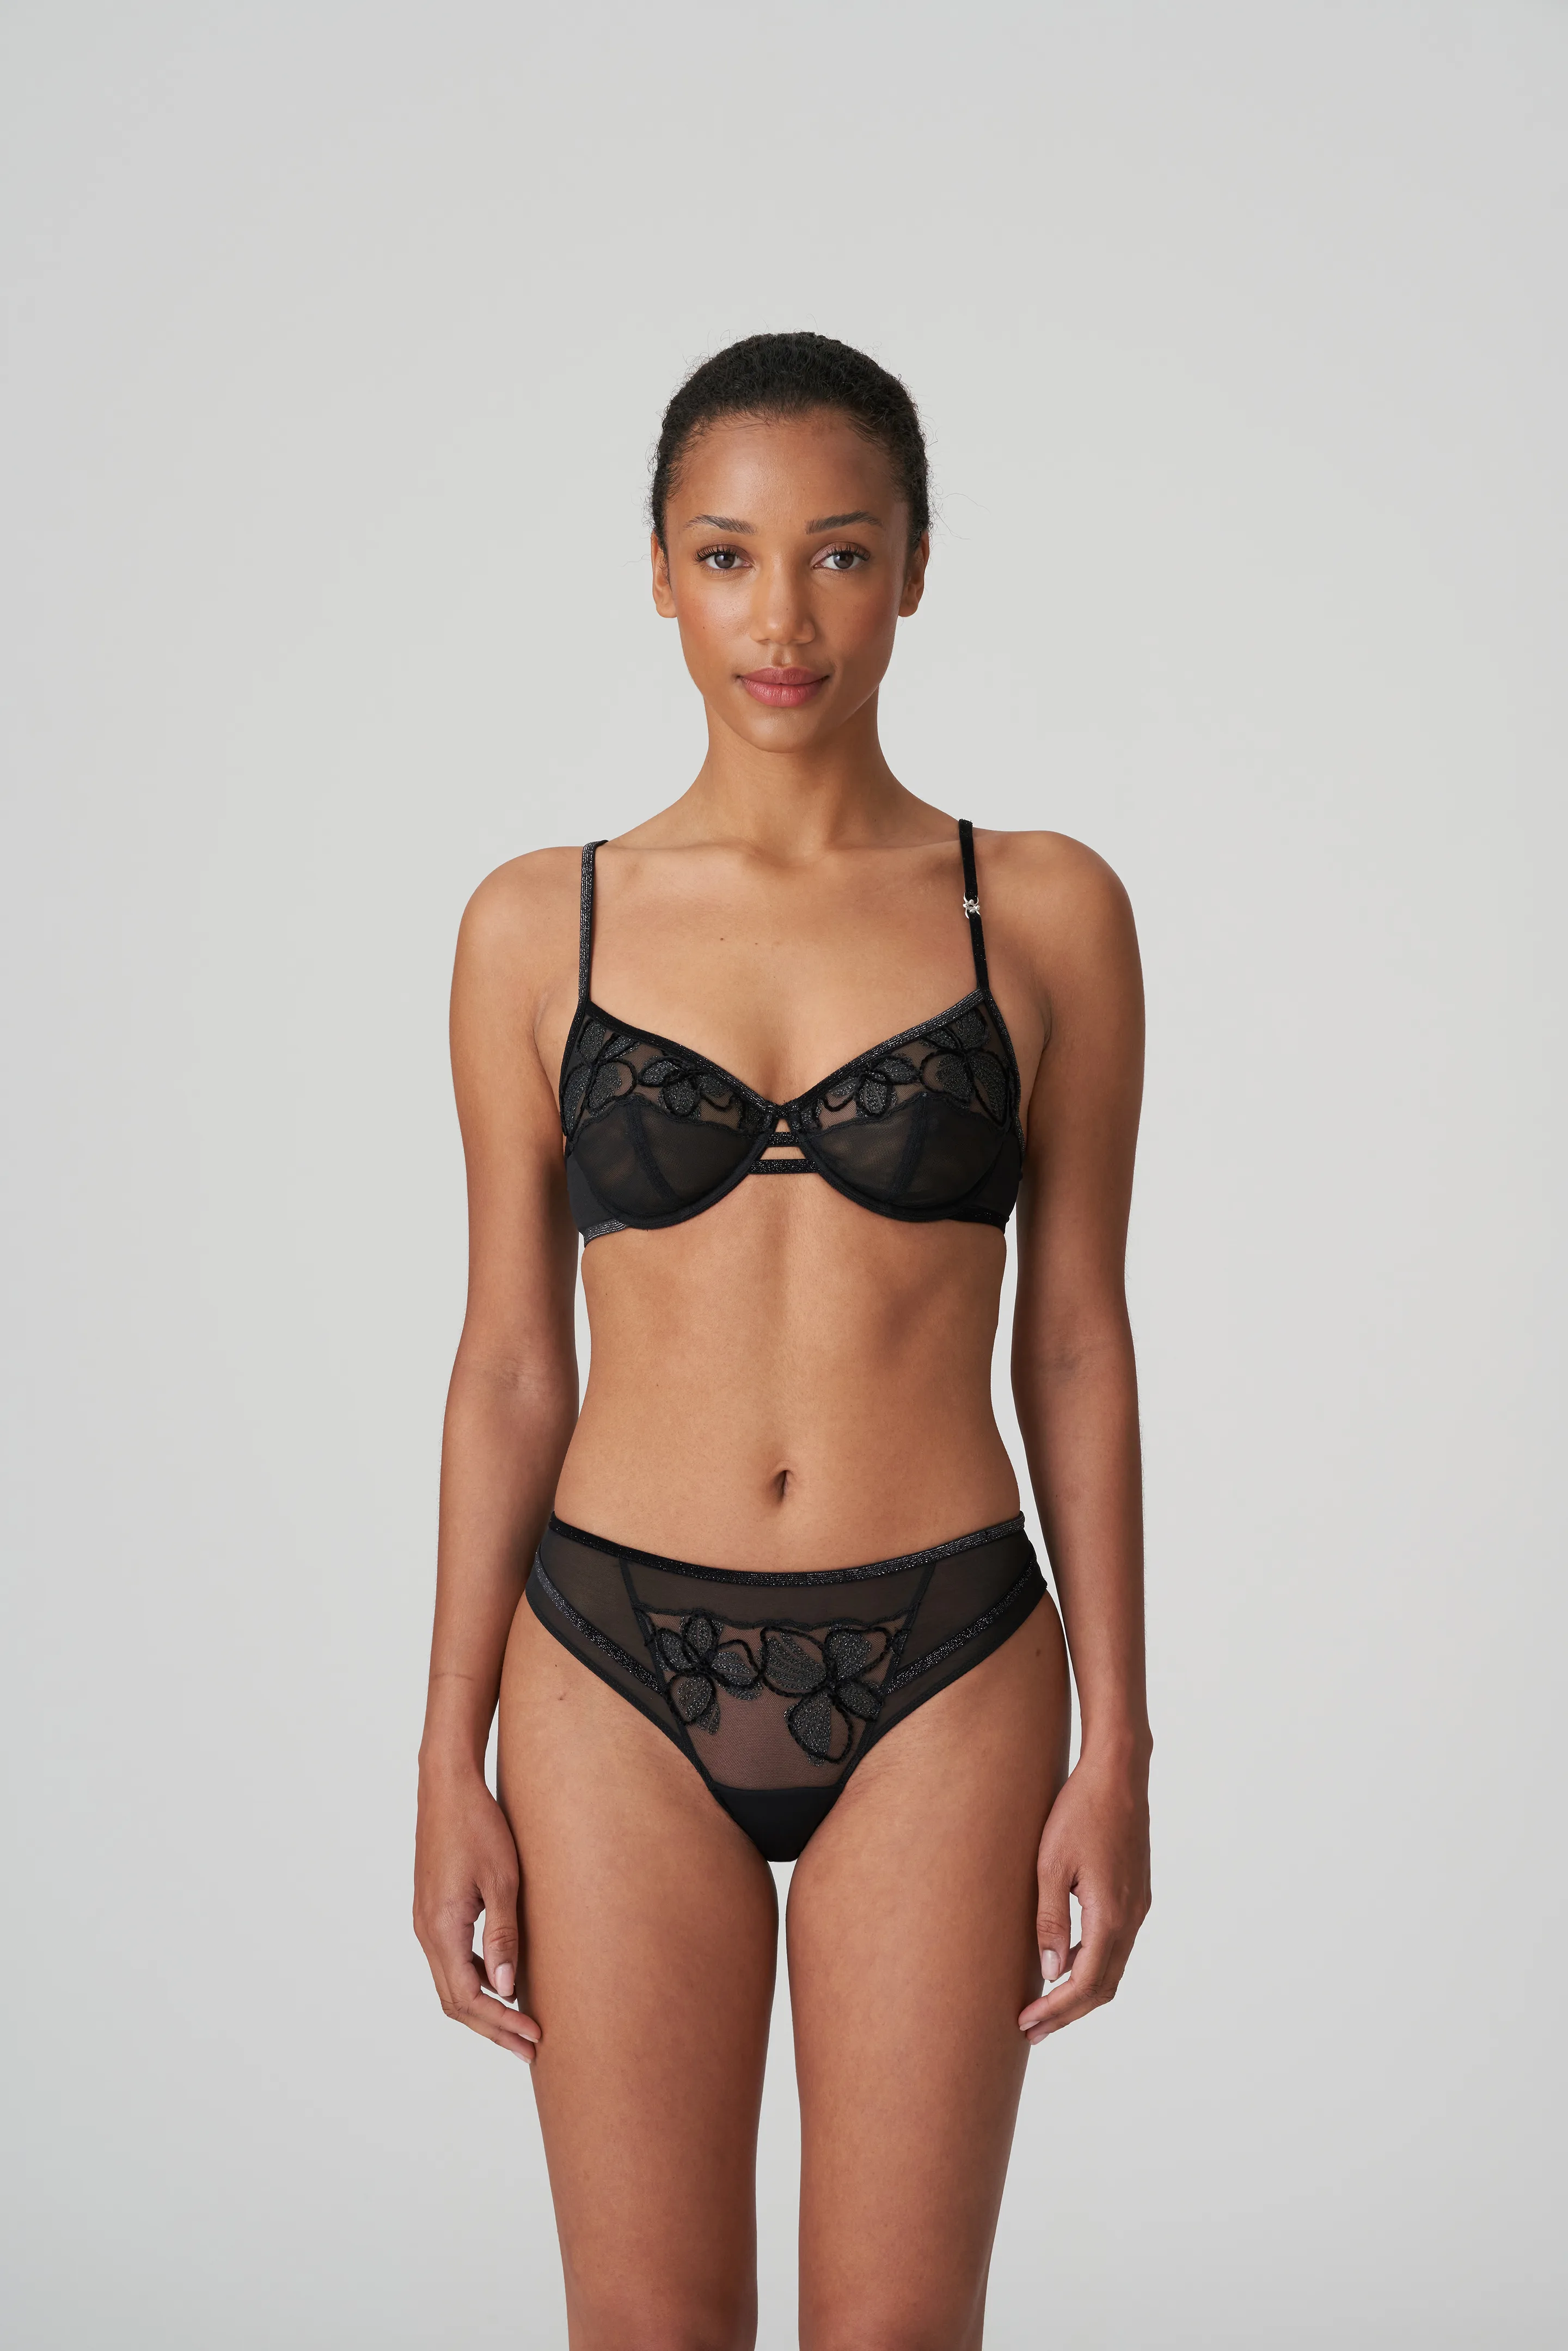 Cut Lace Cage Bra and Sheer Panty Set